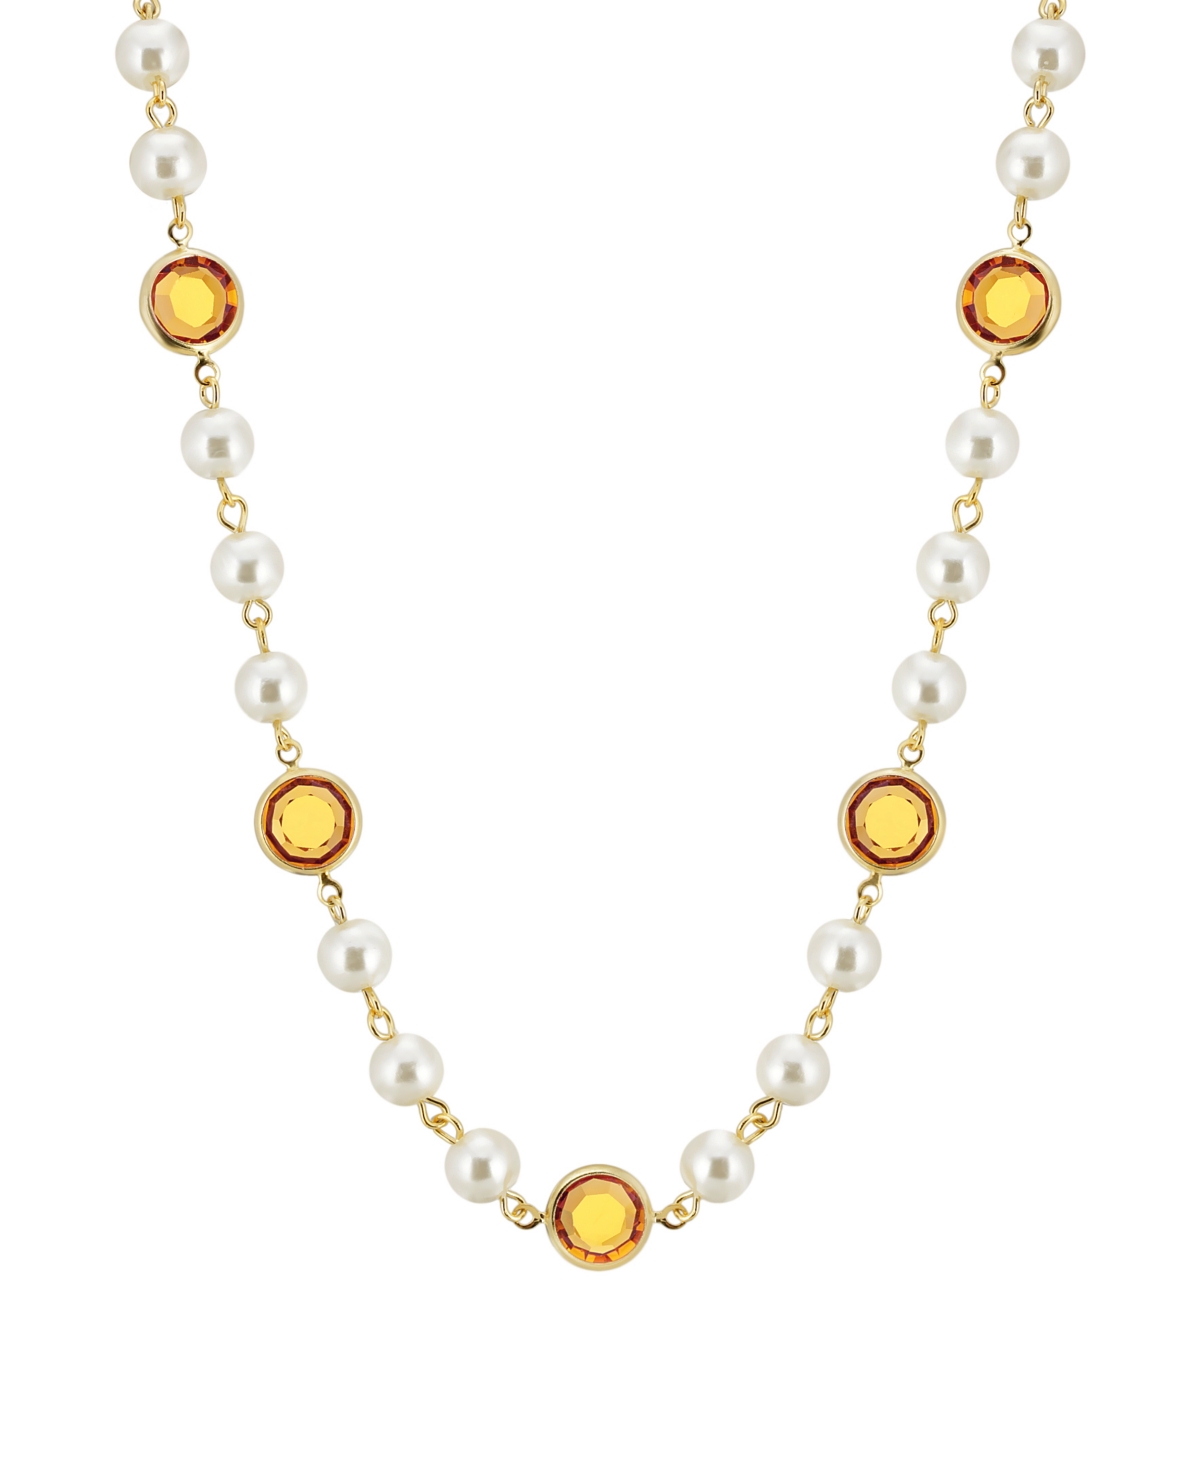 2028 Gold-tone Imitation Pearl With Yellow Channels 16" Adjustable Necklace